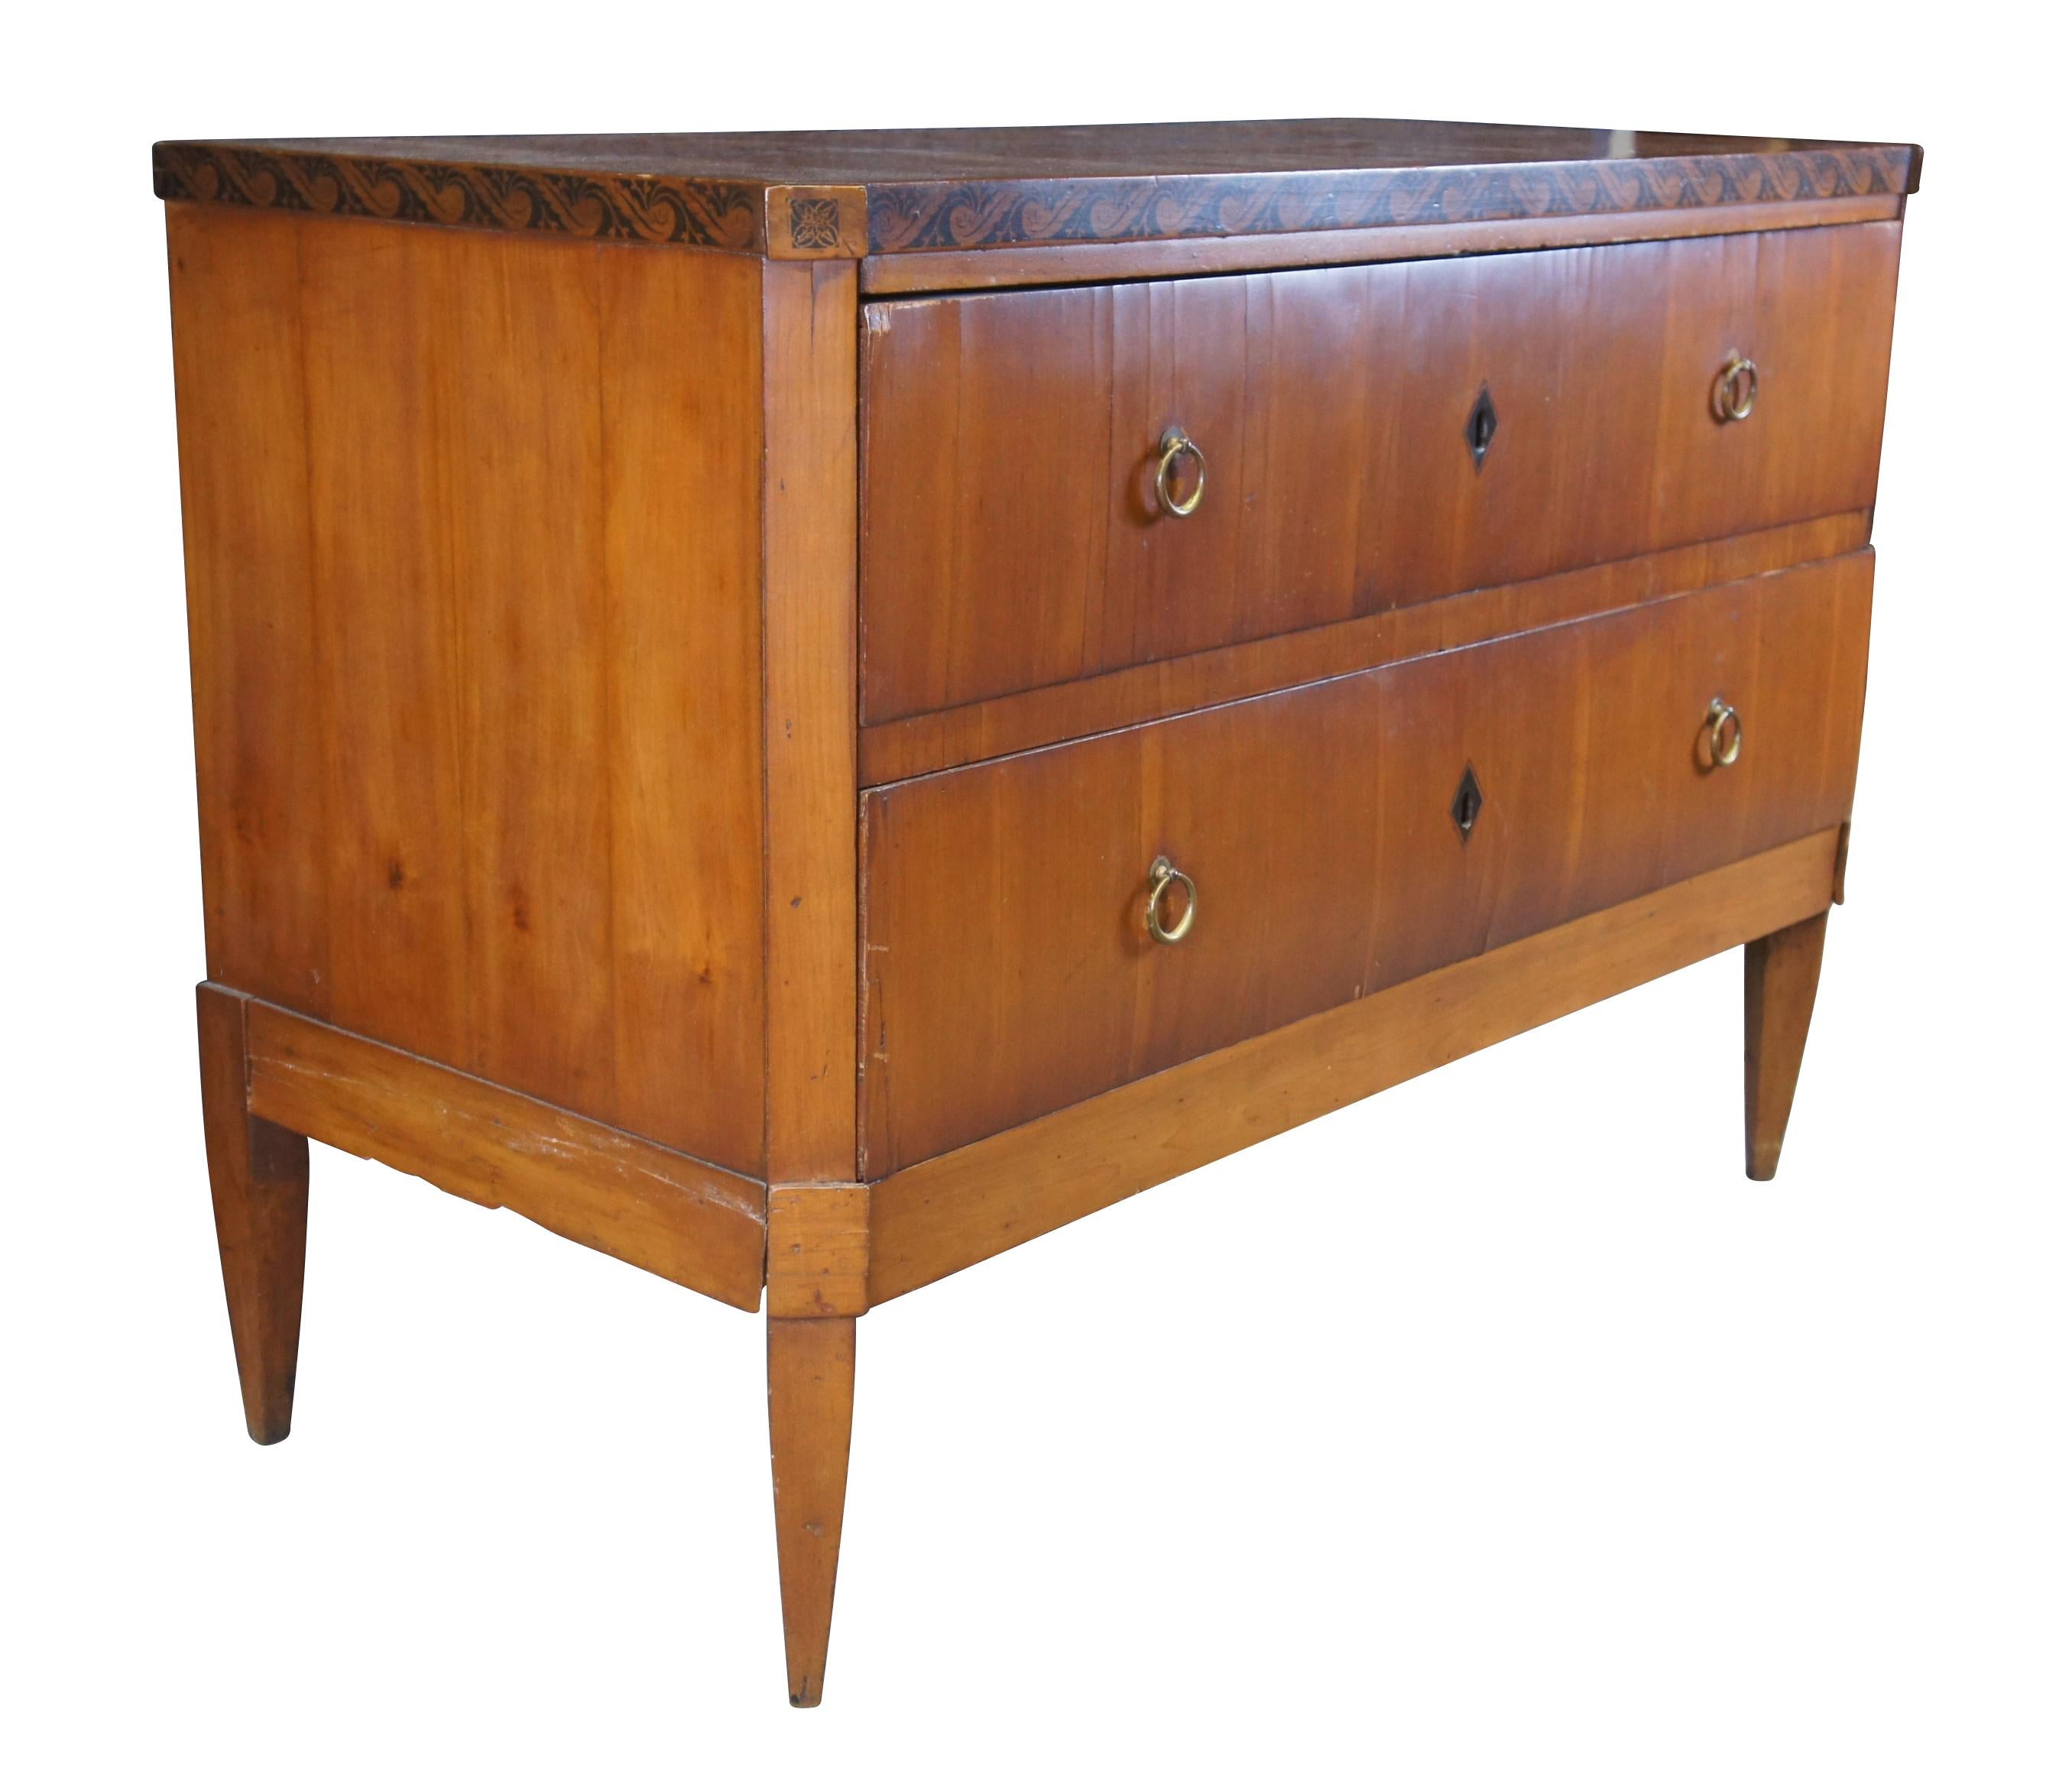 Antique German Biedermeier dresser / chest of drawers / console.  Made of cherry featuring rectangular form with wavecrest design and two drawers supported by tapered legs.  Circa mid to early 19th century.

Dimensions:
31.5